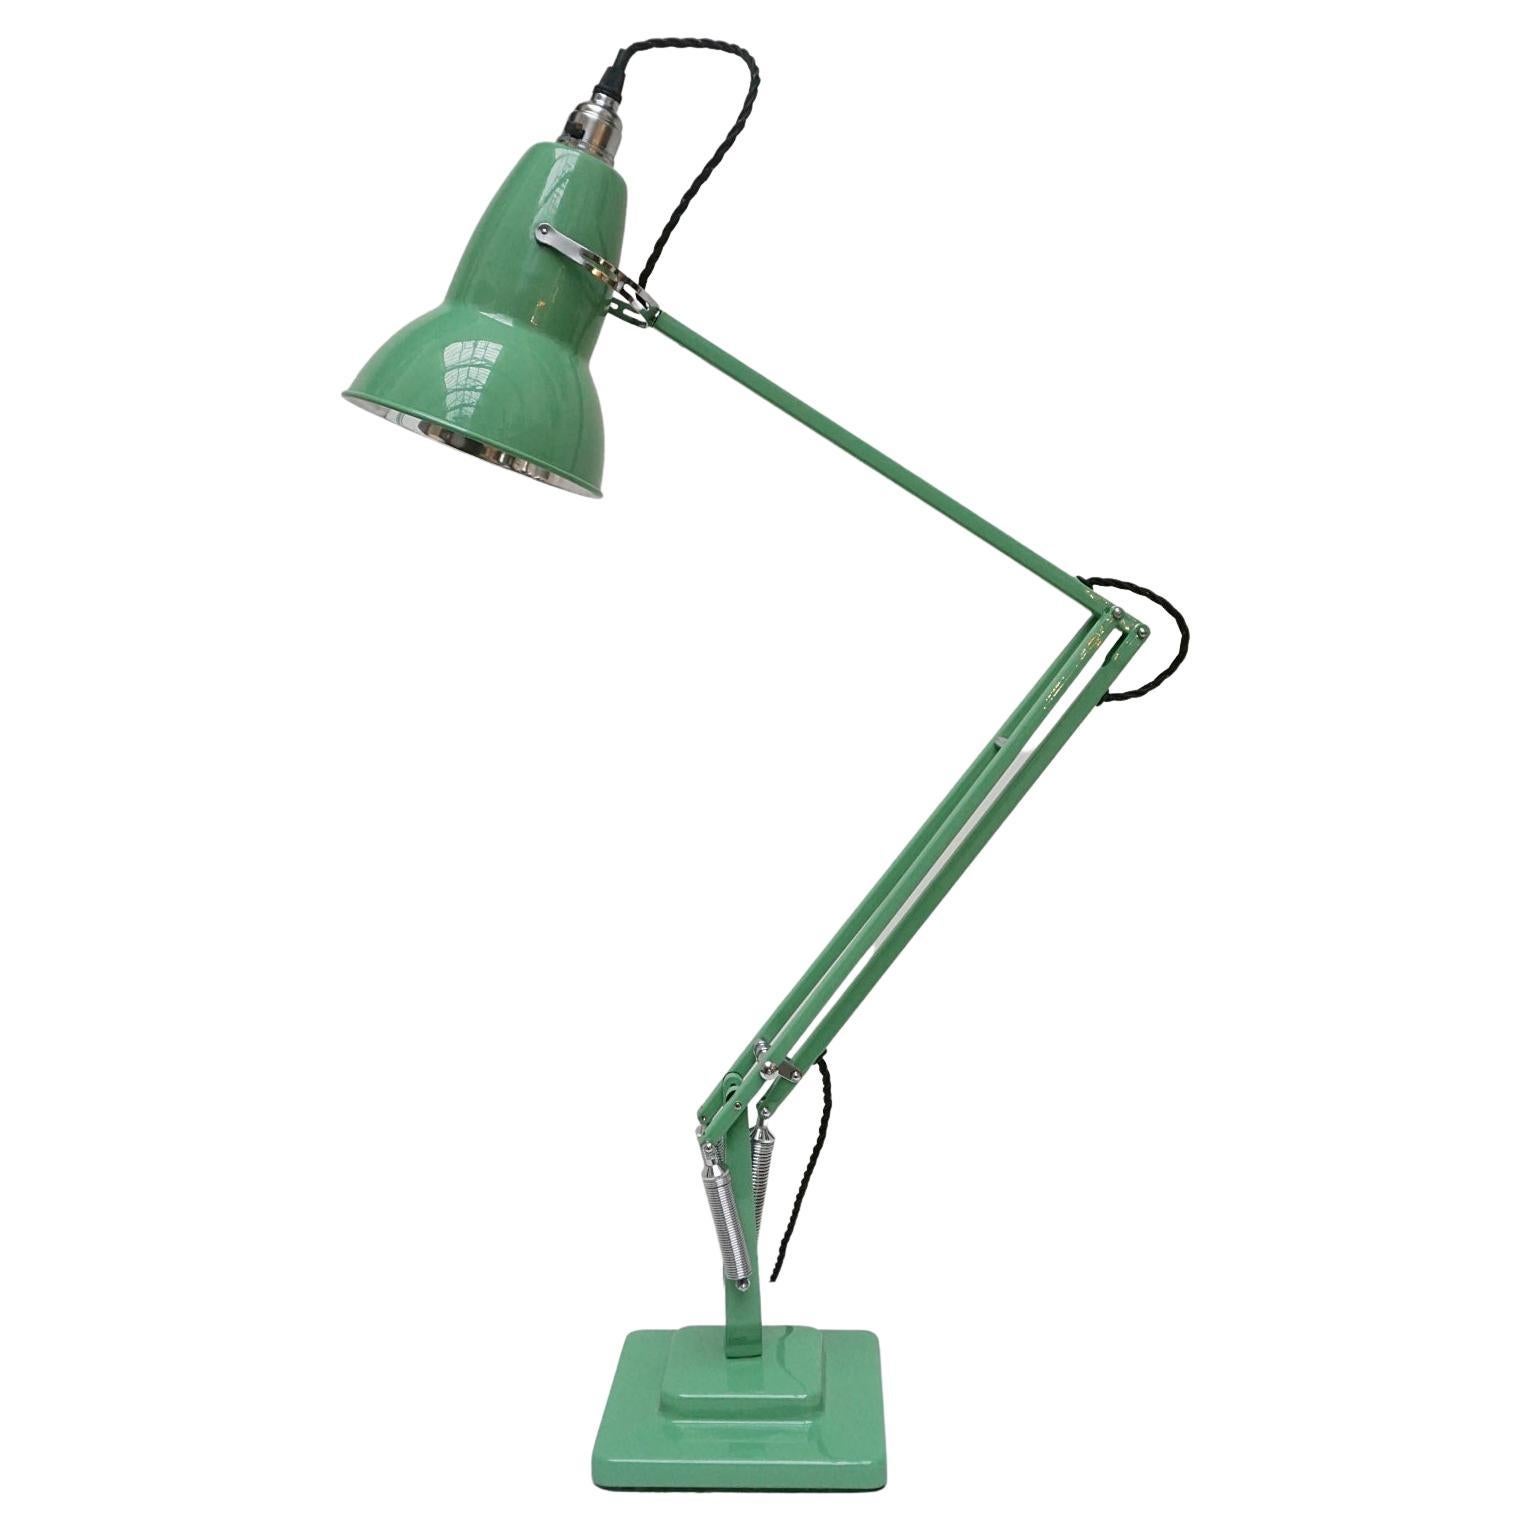 Herbert Terry & Sons Mid 20th Century Repainted Green Anglepoise Desk Lamp